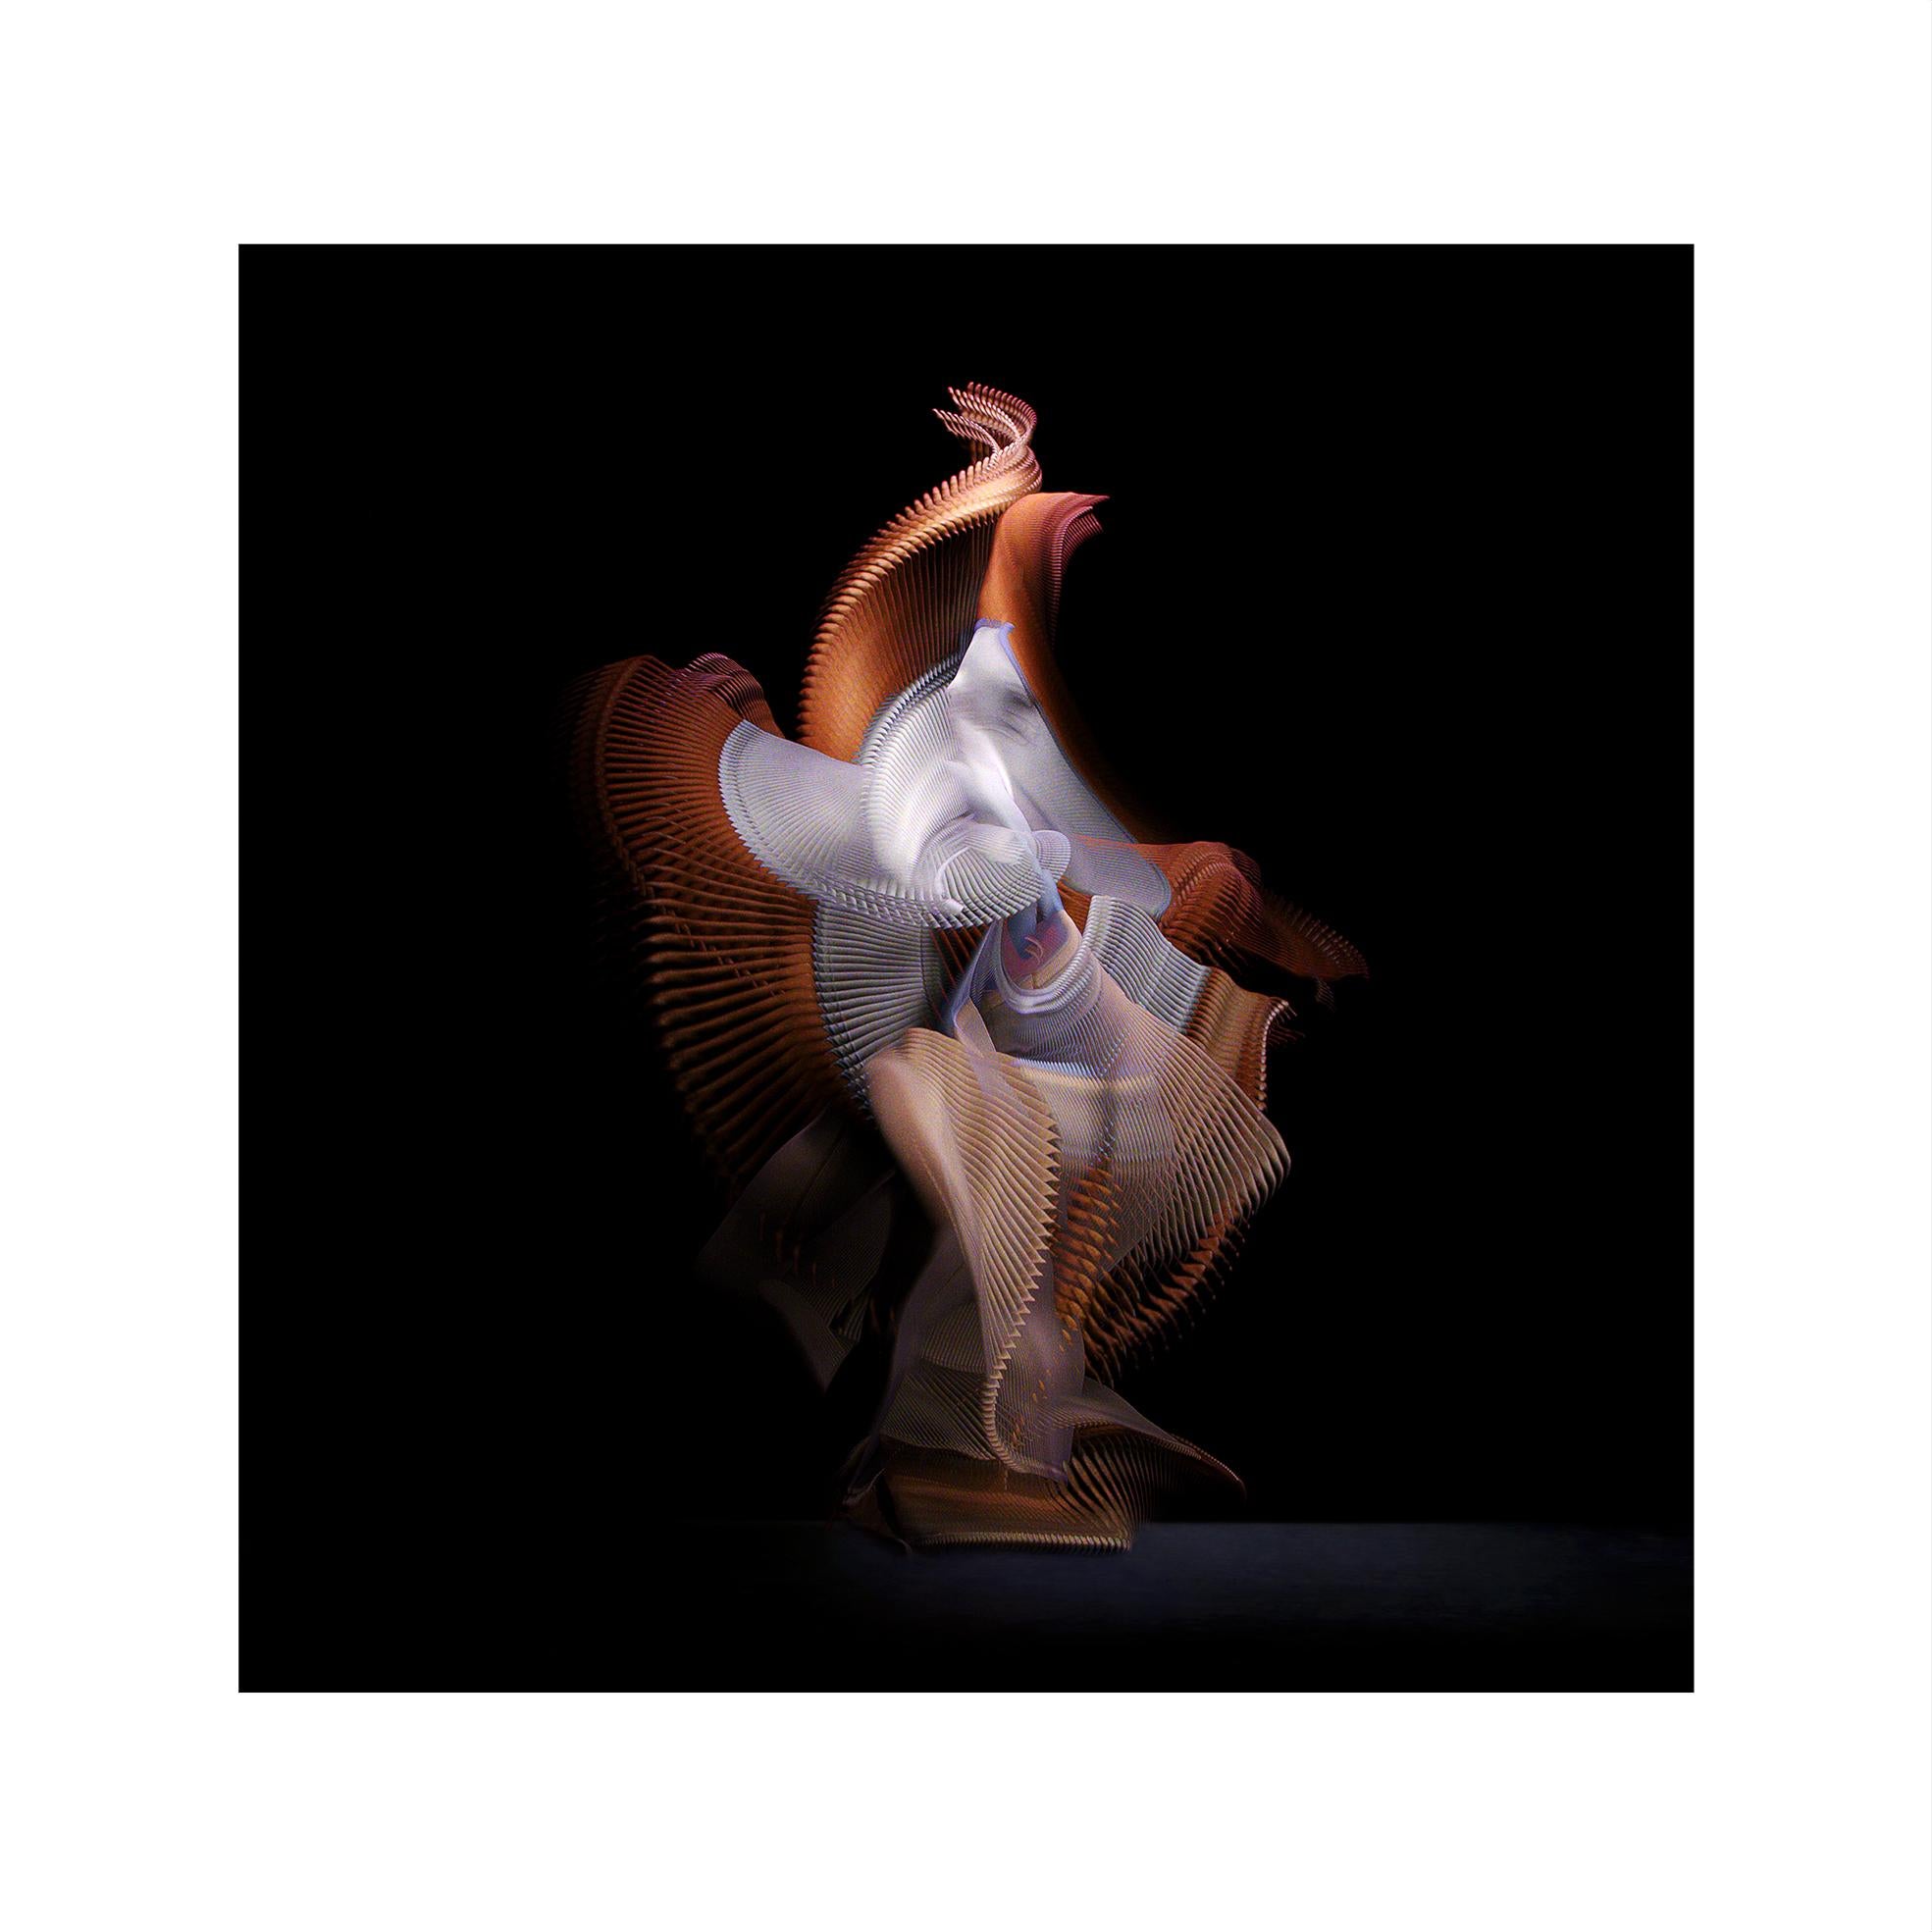 Abstract Dancers, White 1, 2019 by Giles Revell - Photography, Contemporary